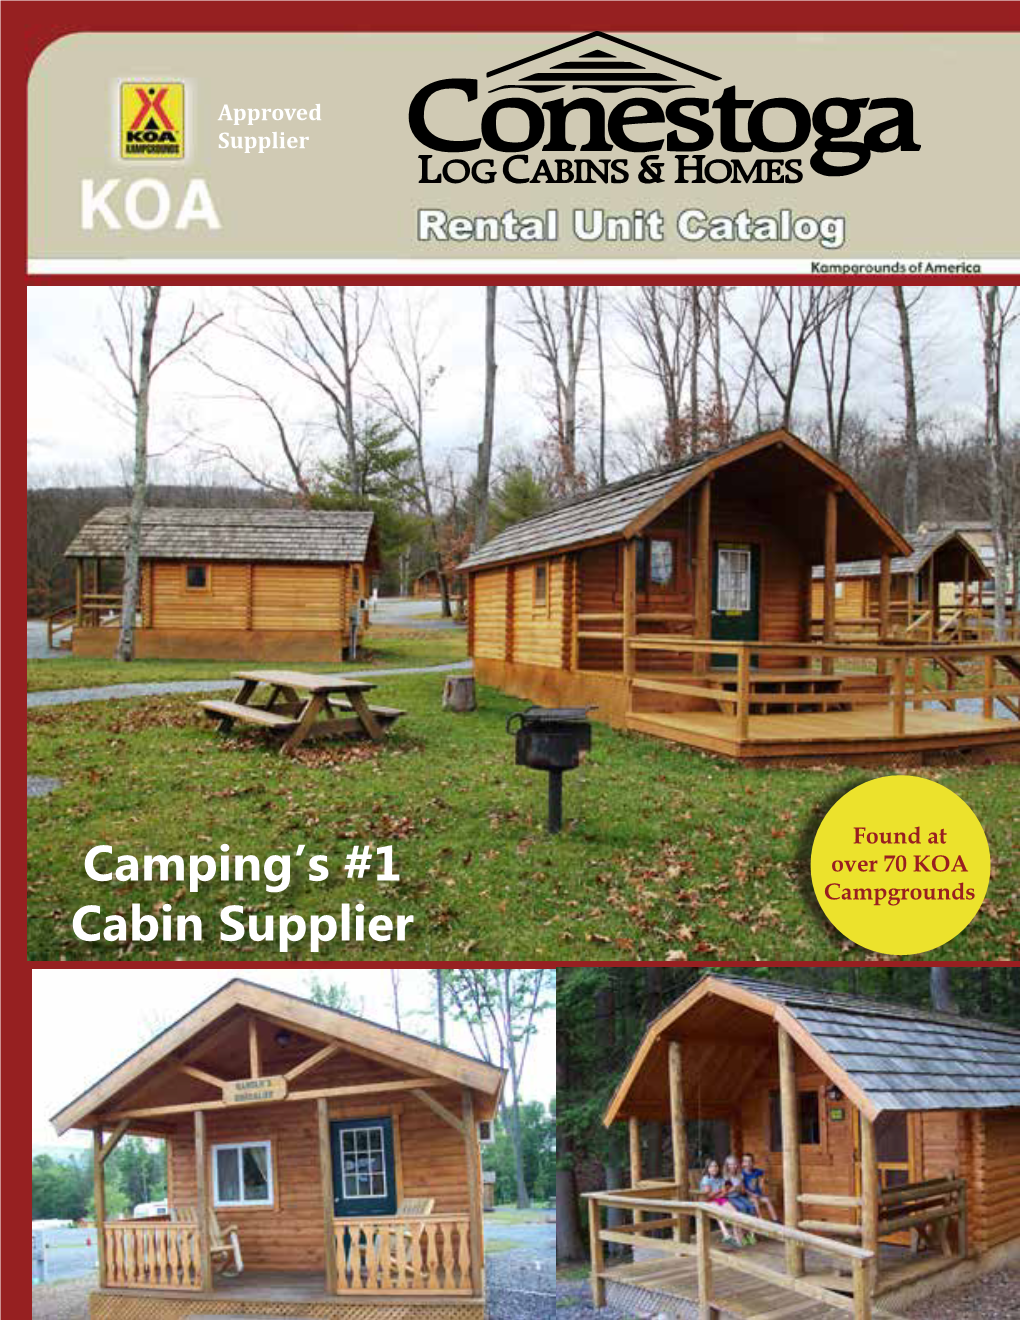 Camping's #1 Cabin Supplier